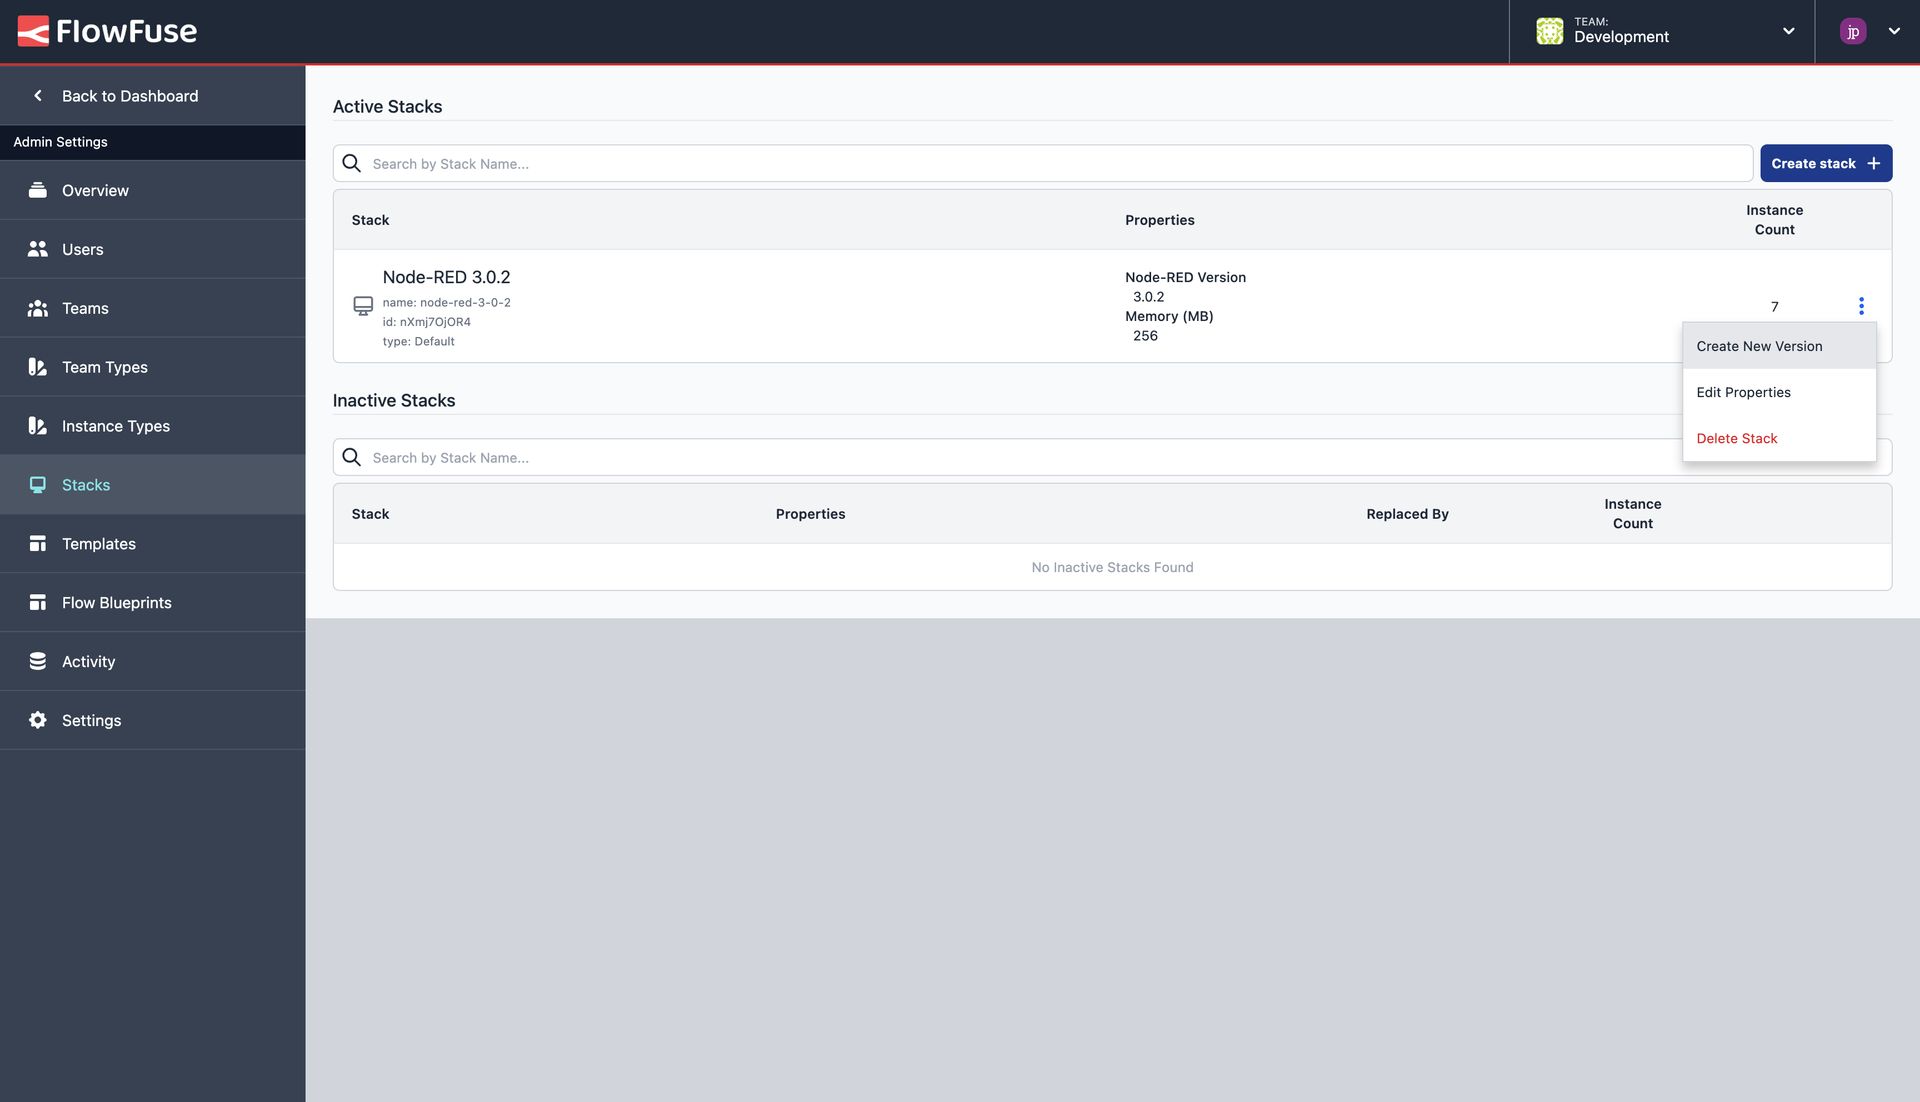 Screenshot of FlowFuse showing where admins can create new stacks